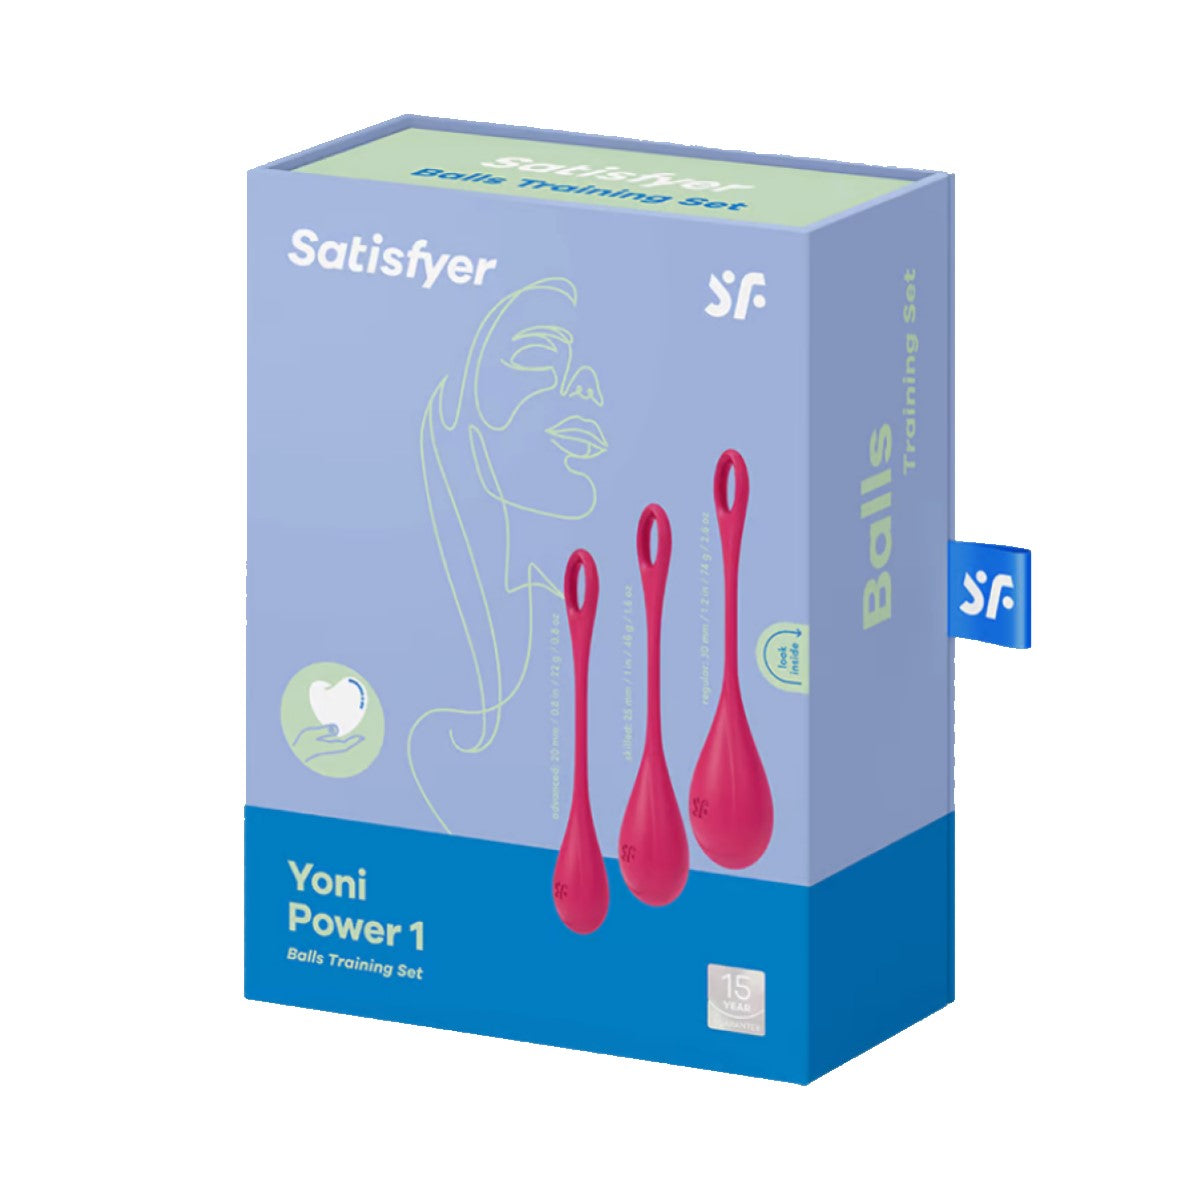 Yoni Power 1 by Satisfyer